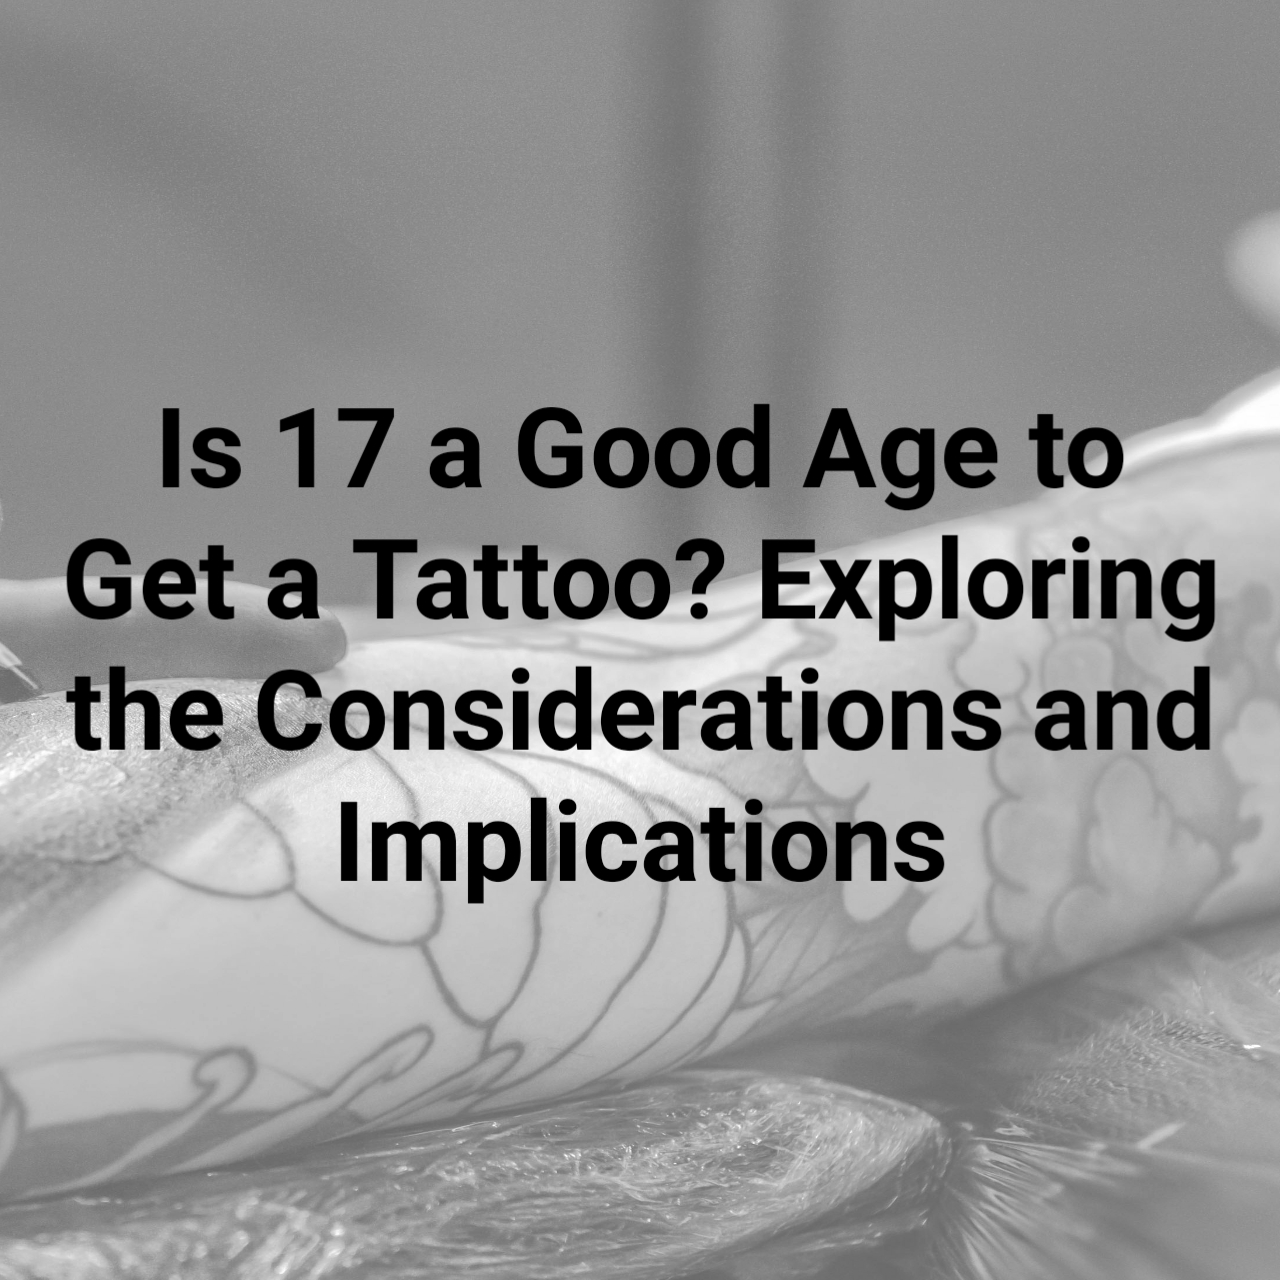 Is 17 a good age to get a tattoo